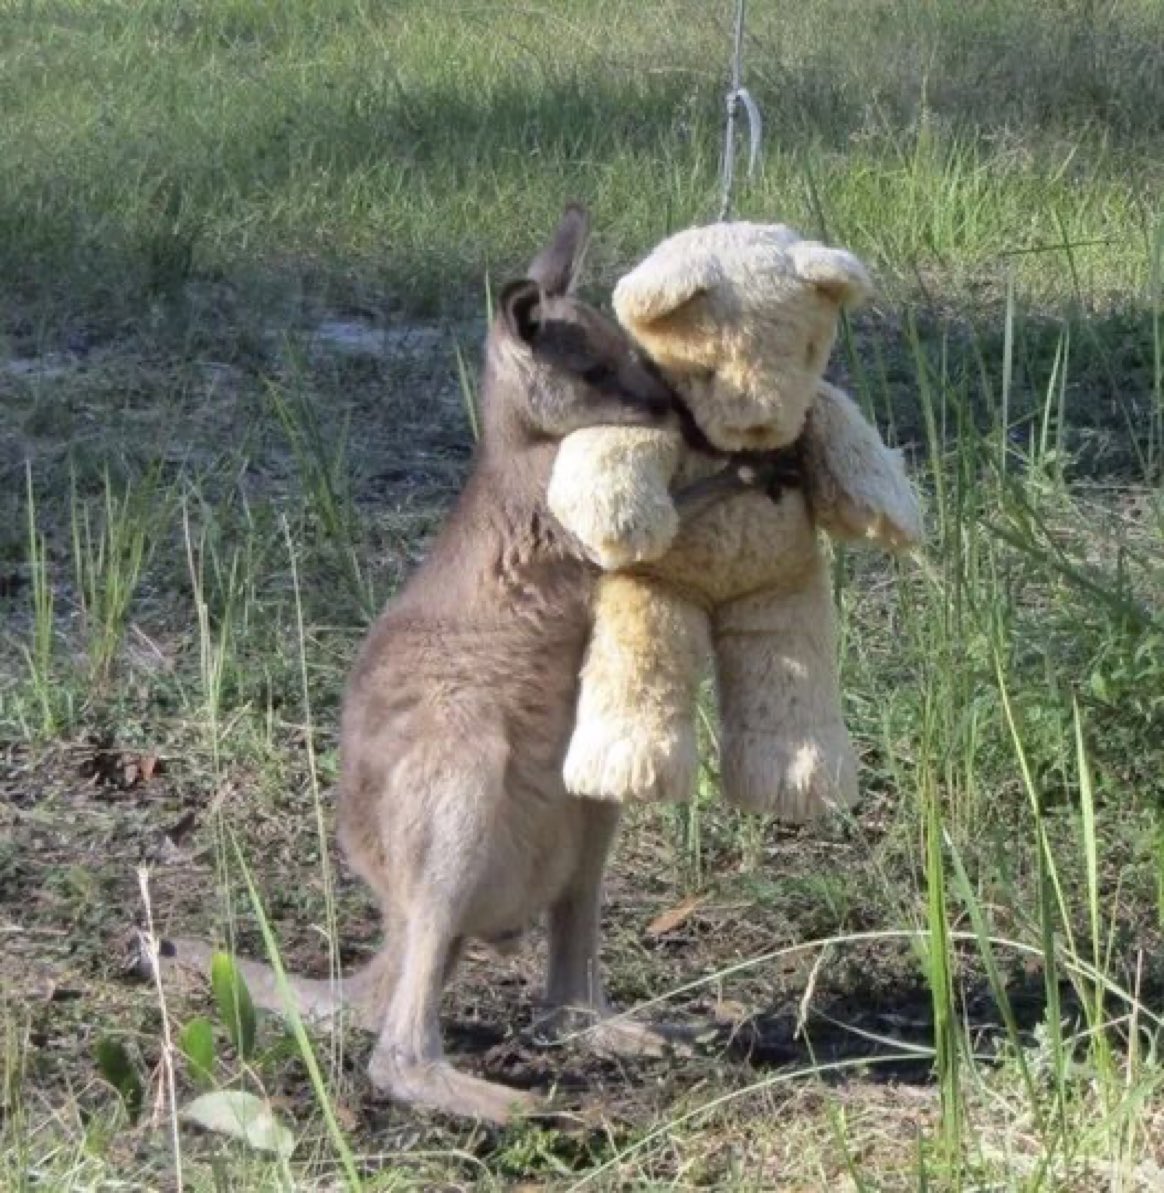 The story of 'Doodlebug', an orphaned baby kangaroo who was found on the side of the road, a little baby about two months old. Tim Beshara and his mum Gillian Abbott who is a wildlife caretaker took care of him, and gave him a teddy bear for comfort, and he wouldn't stop hugging…